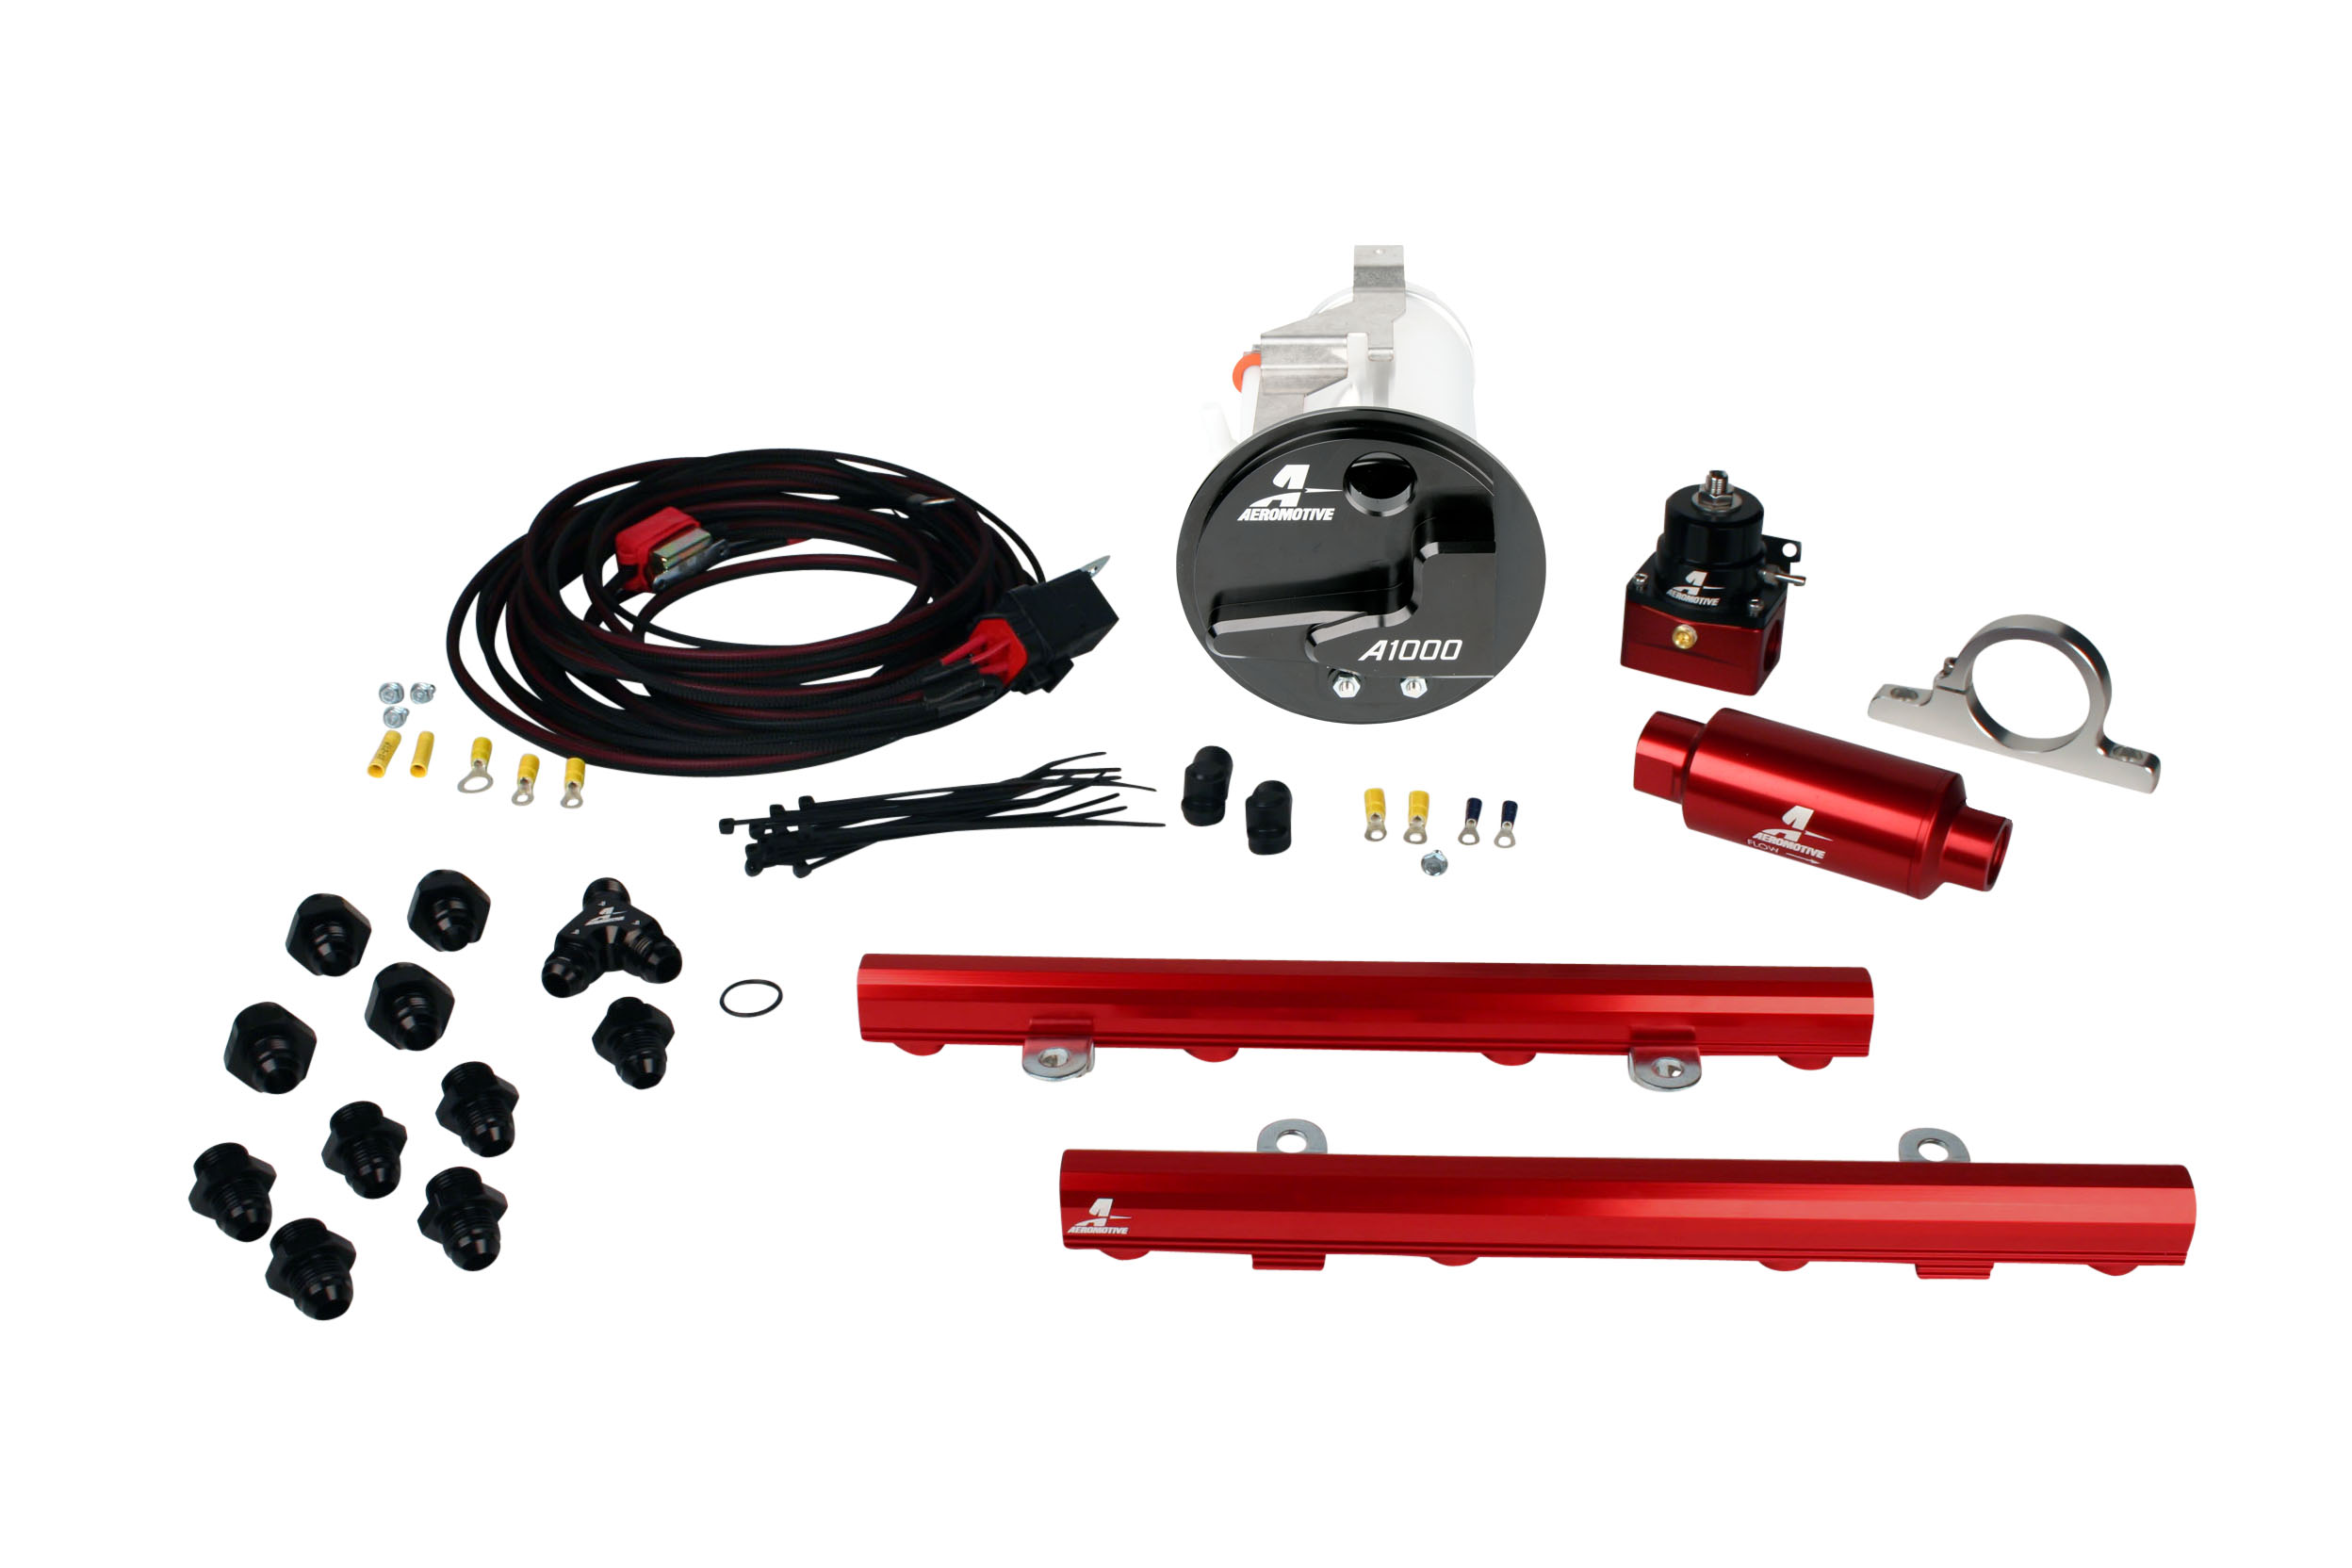 2005-2009 Ford Mustang GT Aeromotive Stealth A1000 Race Fuel System w/5.0L 4-V Fuel Rails Coyote Swap